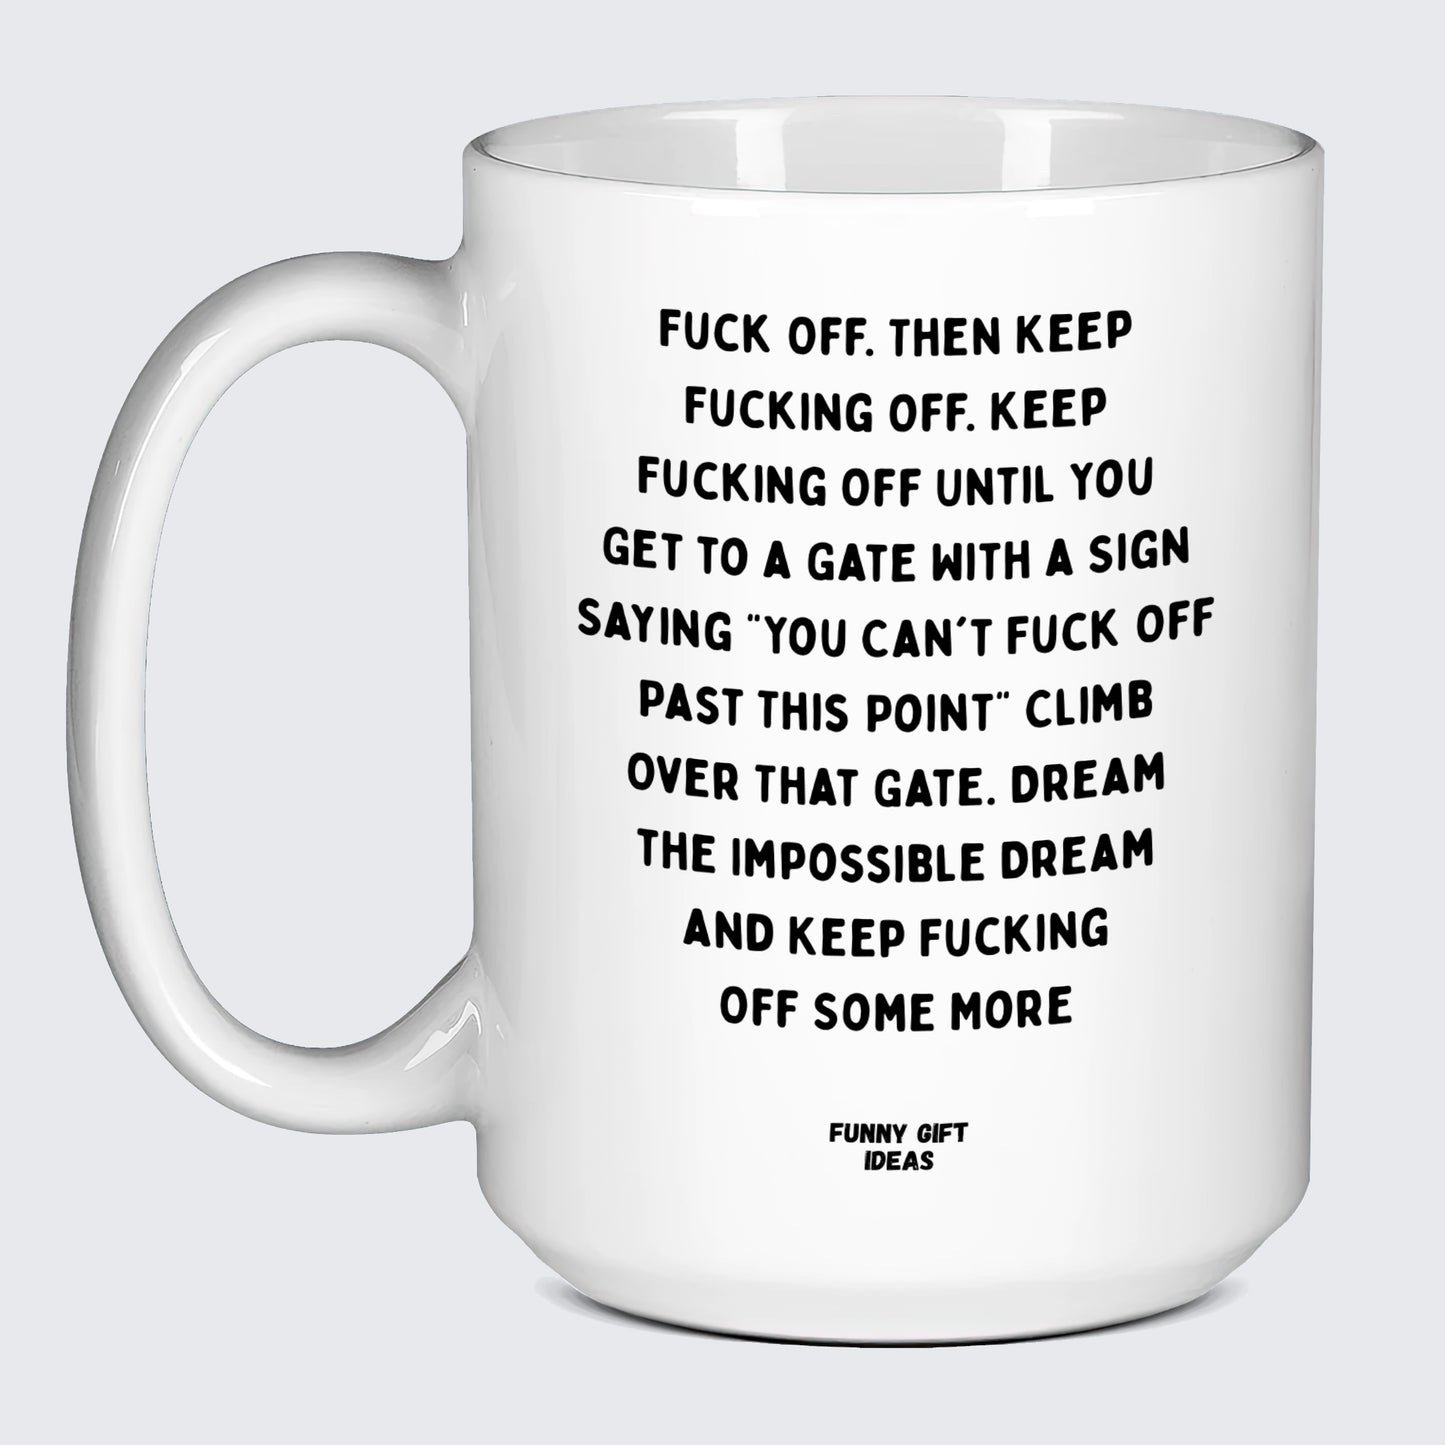 Cool Mugs Fuck Off. Then Keep Fucking Off. Keep Fucking Off Until You Get to a Gate With a Sign Saying You Can't Fuck Off Past This Point" Climb Over That Gate. Dream the Impossible Dream and Keep Fucking Off Some More - Funny Gift Ideas"